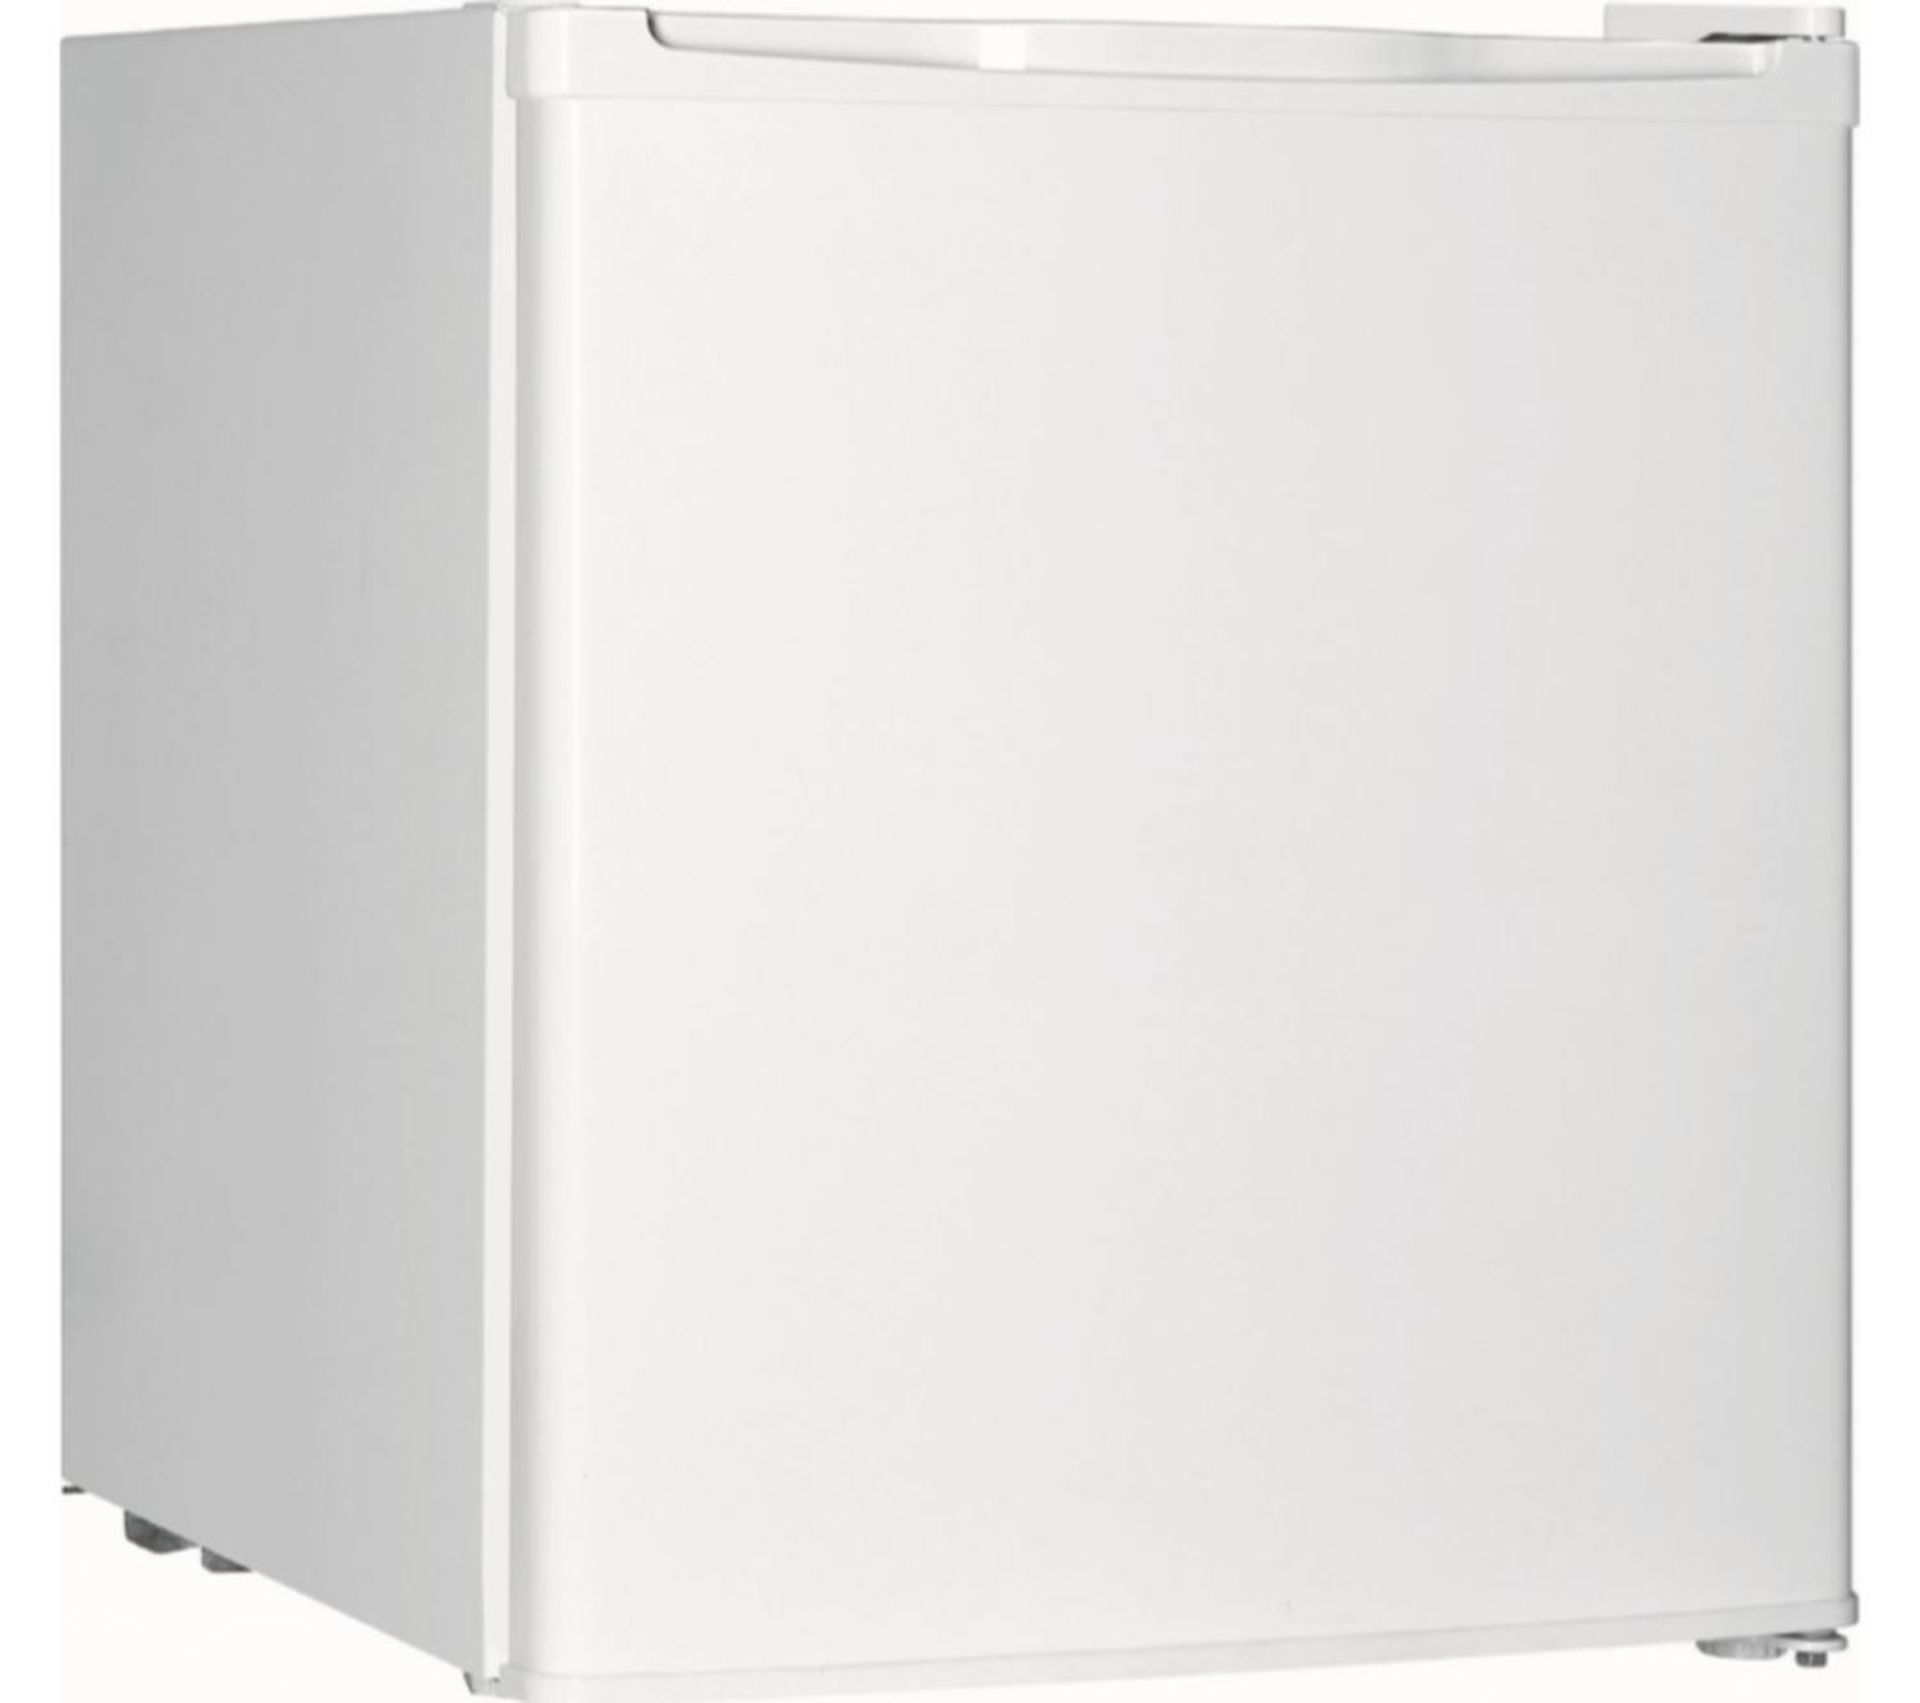 Pallet of Fridge Freezers. Brands include Logik. Latest selling price £459.98 - Image 2 of 4